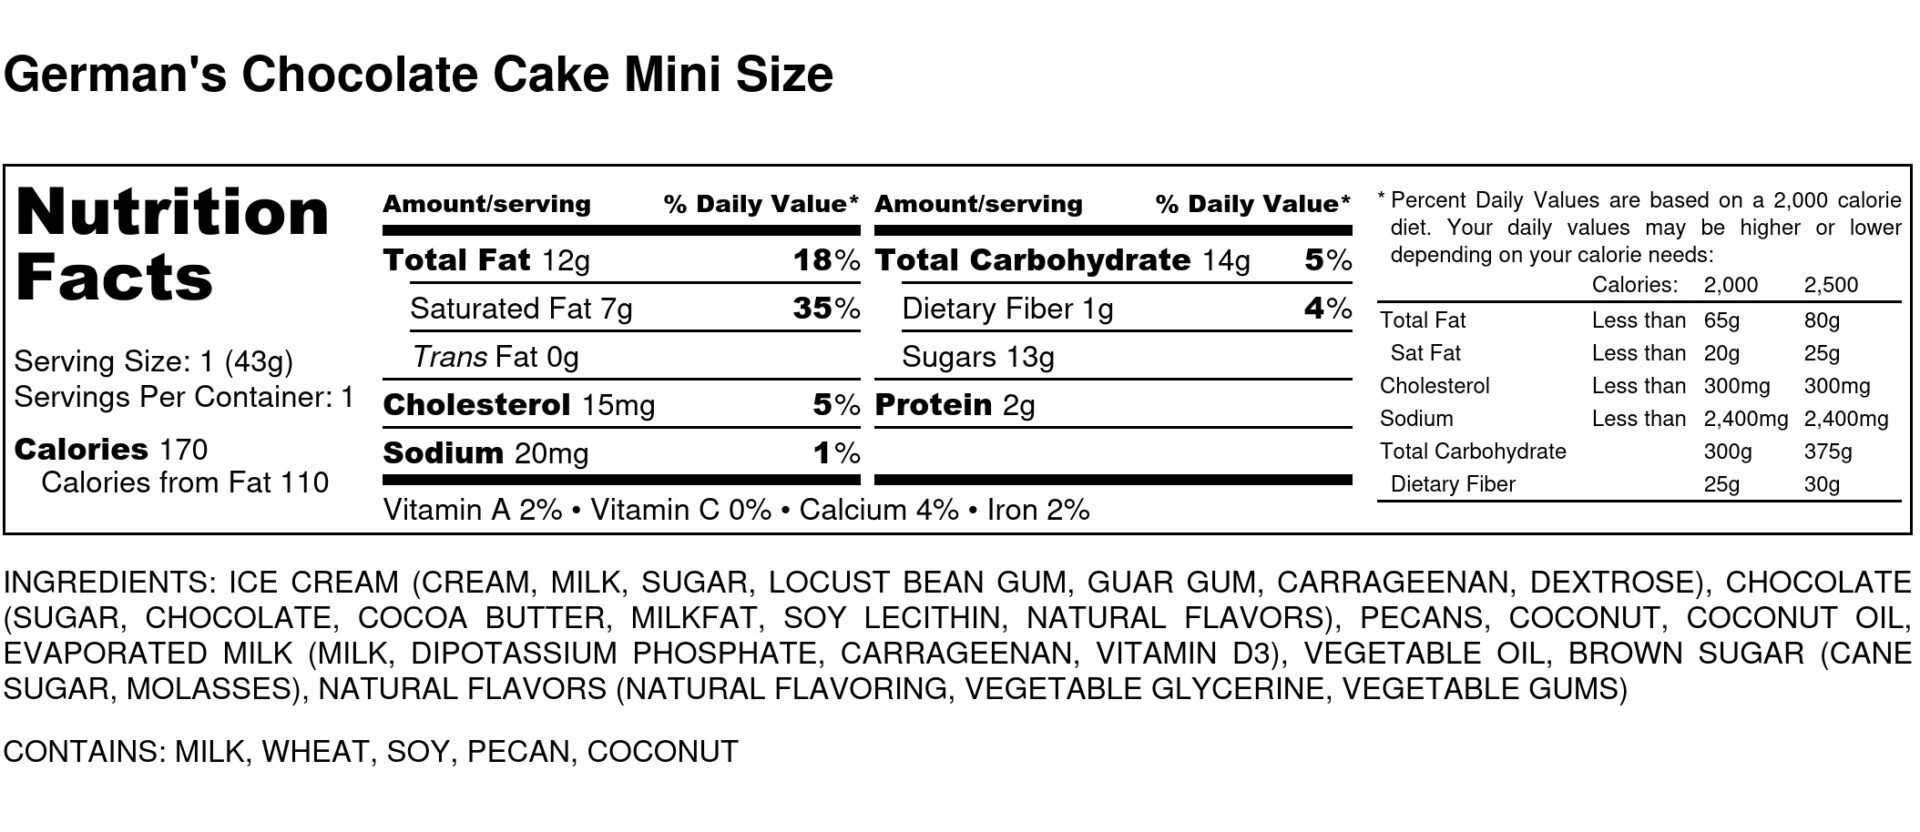 Germans Chocolate Cake Mini Size Nutrition Label scaled